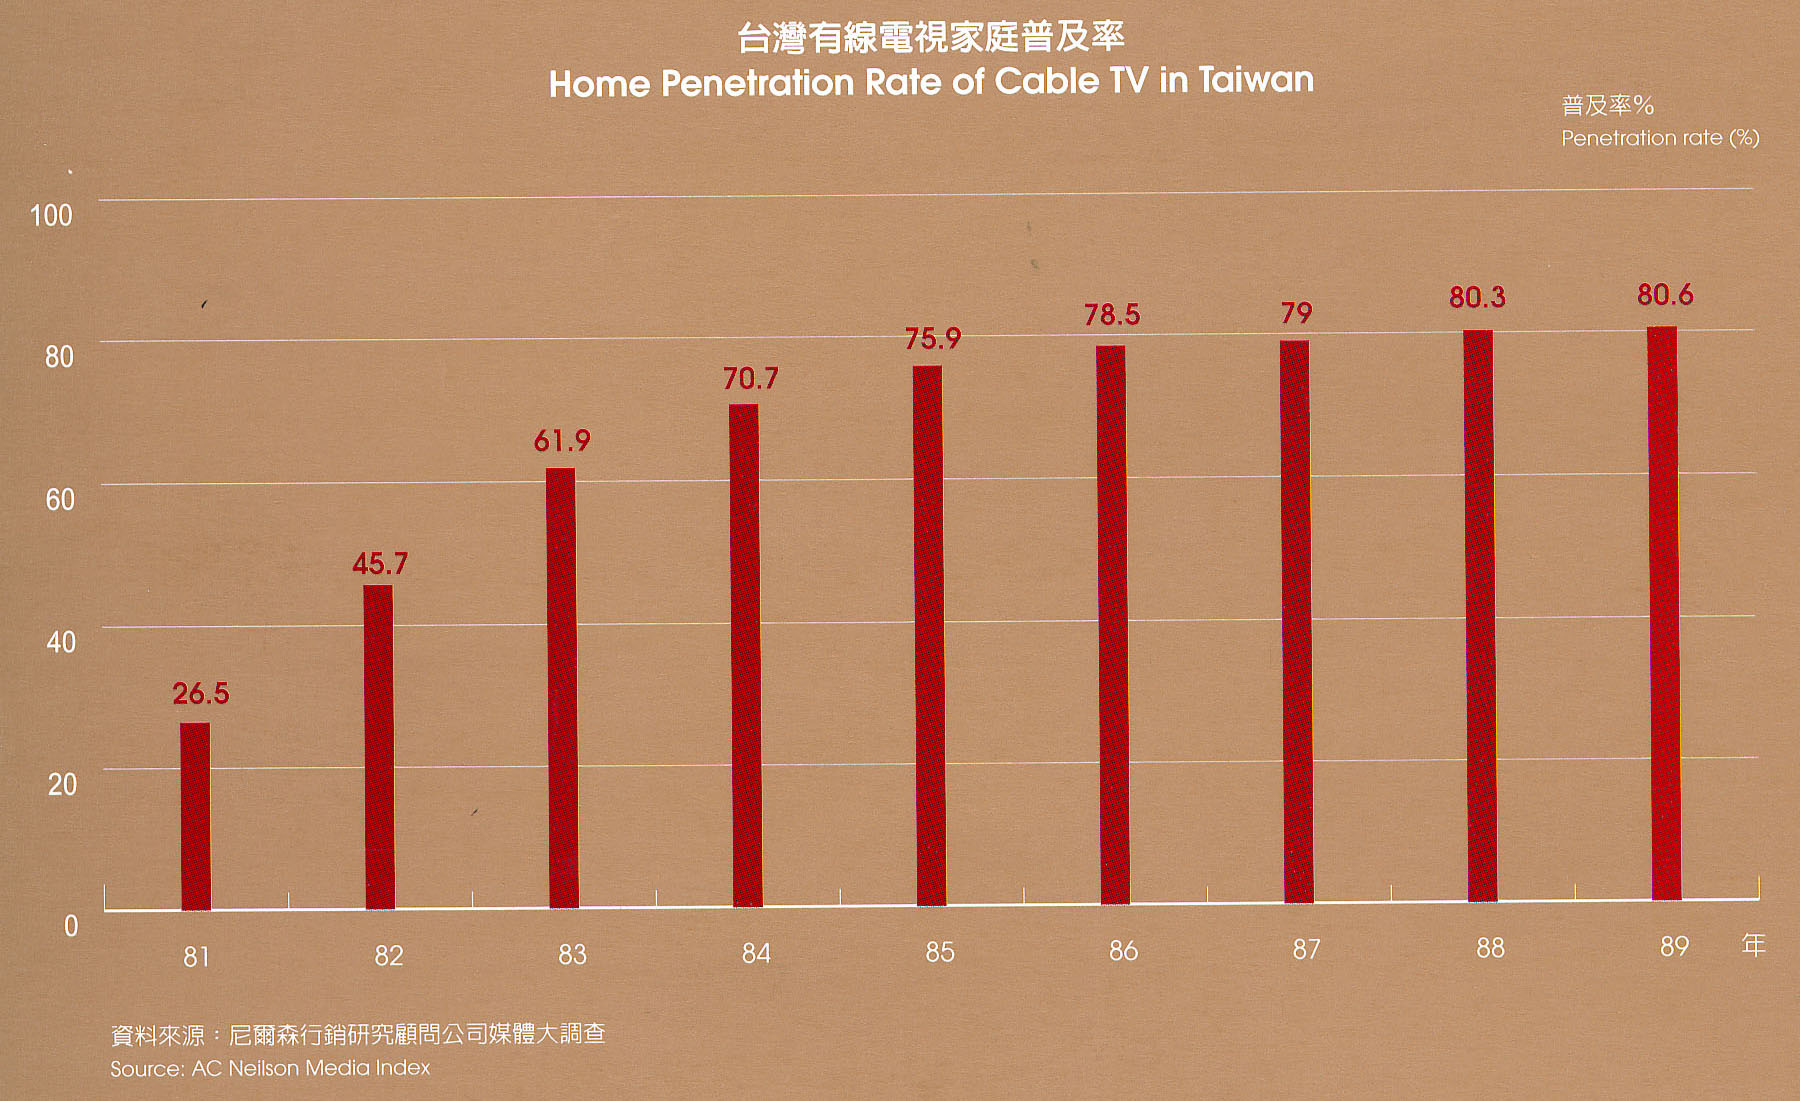 Home Penetration Rate of Cable TV in Taiwan